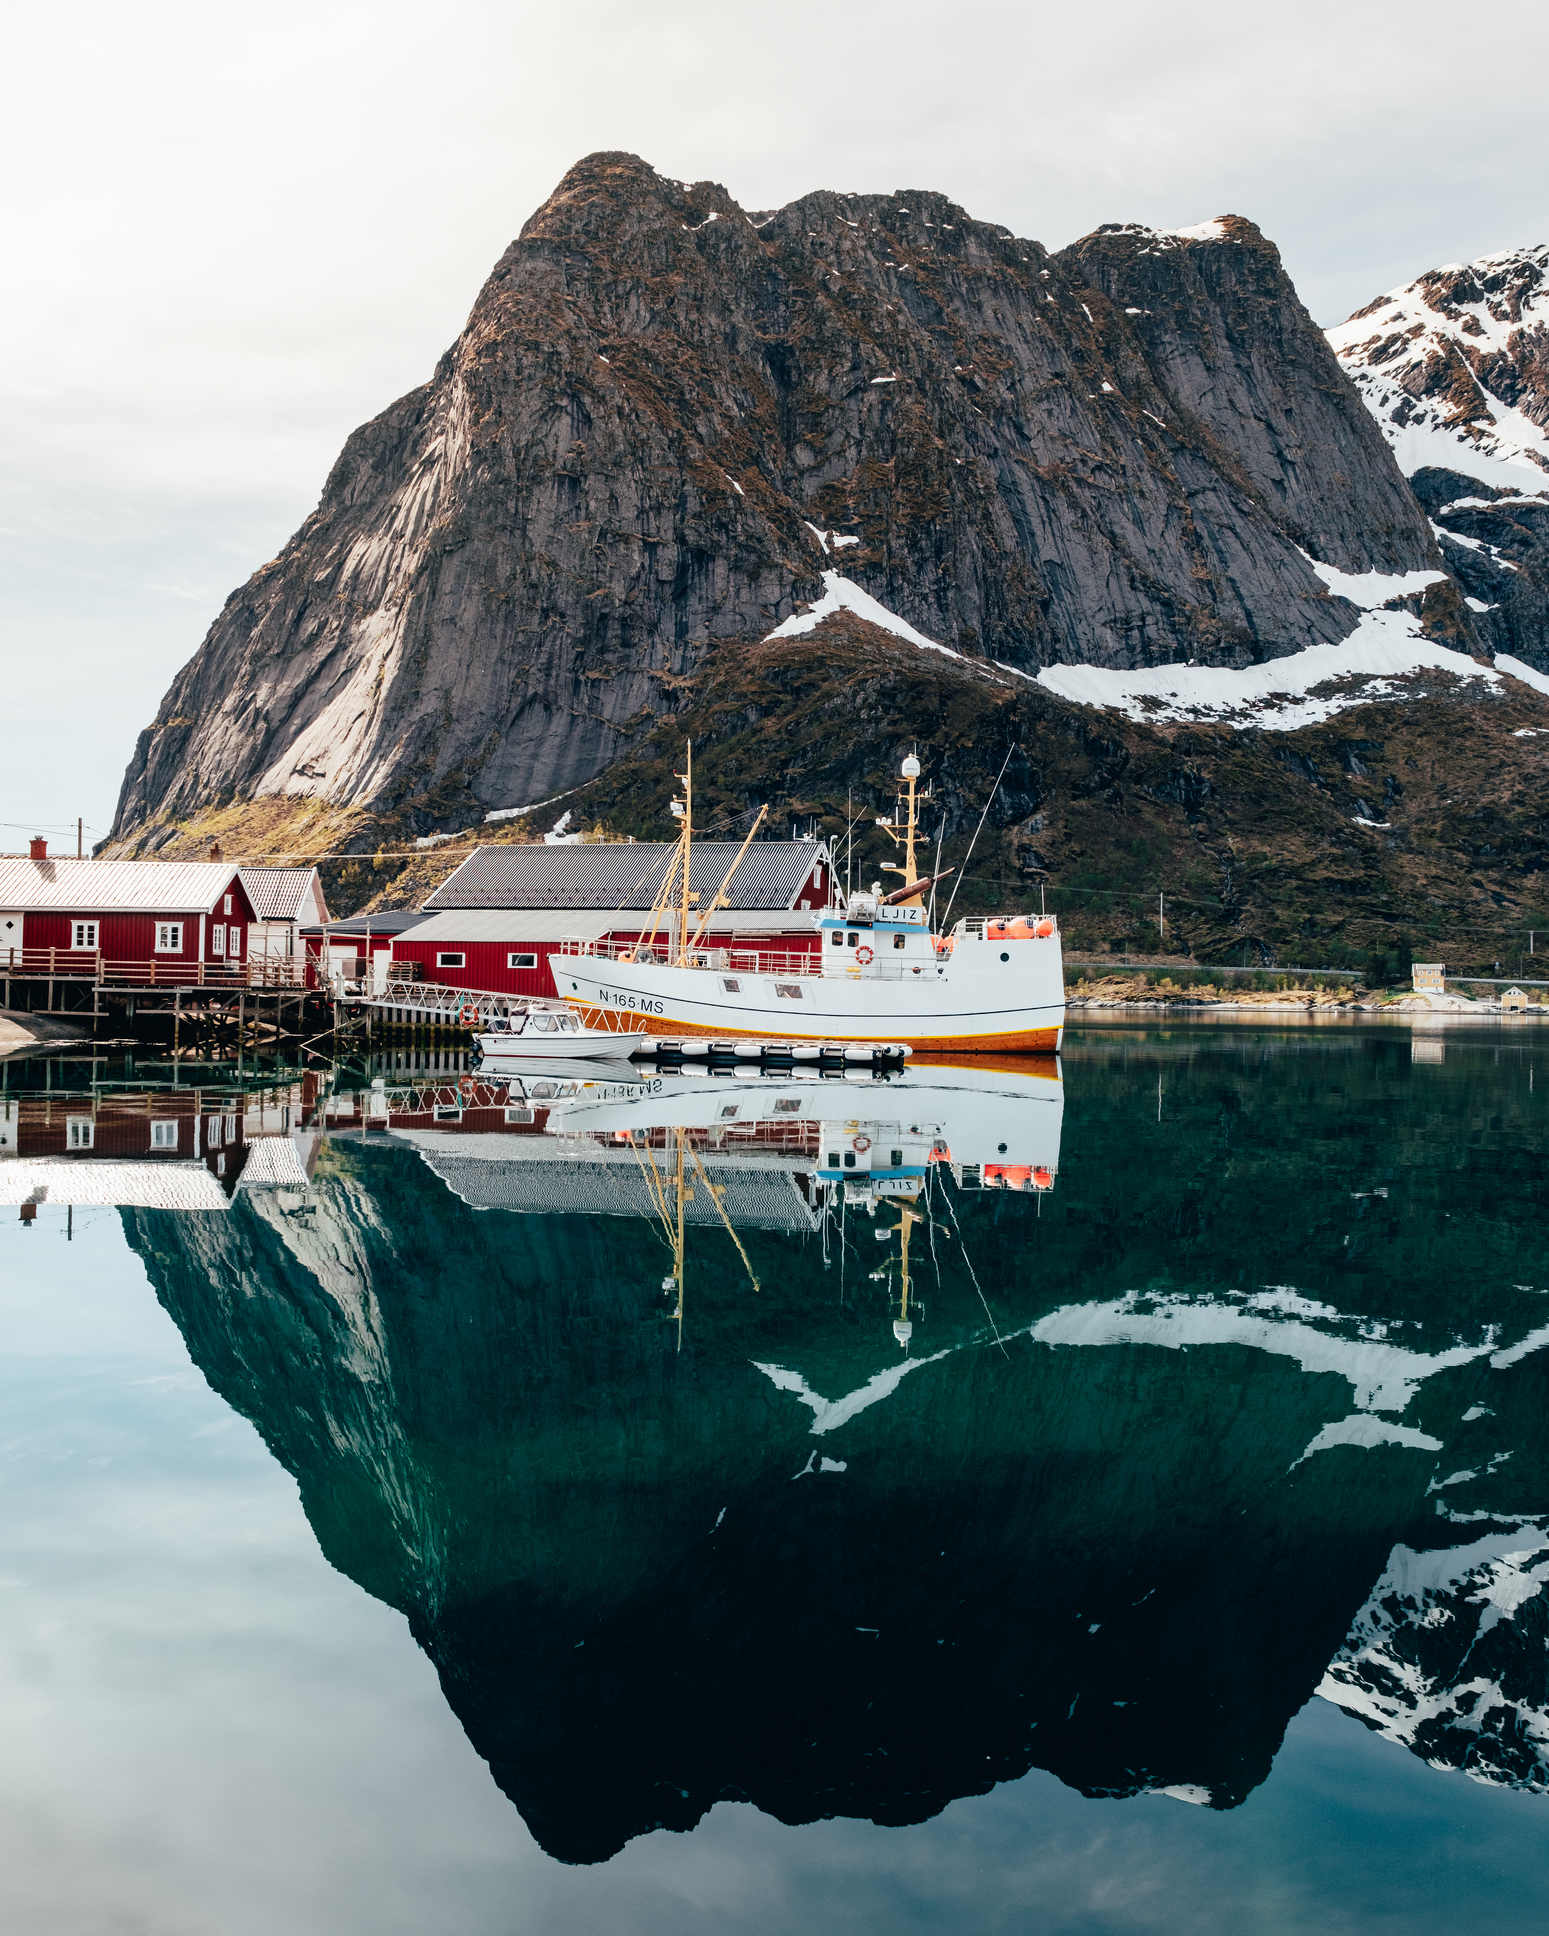 Reflections of a mountain and fishing boat in Lofoten